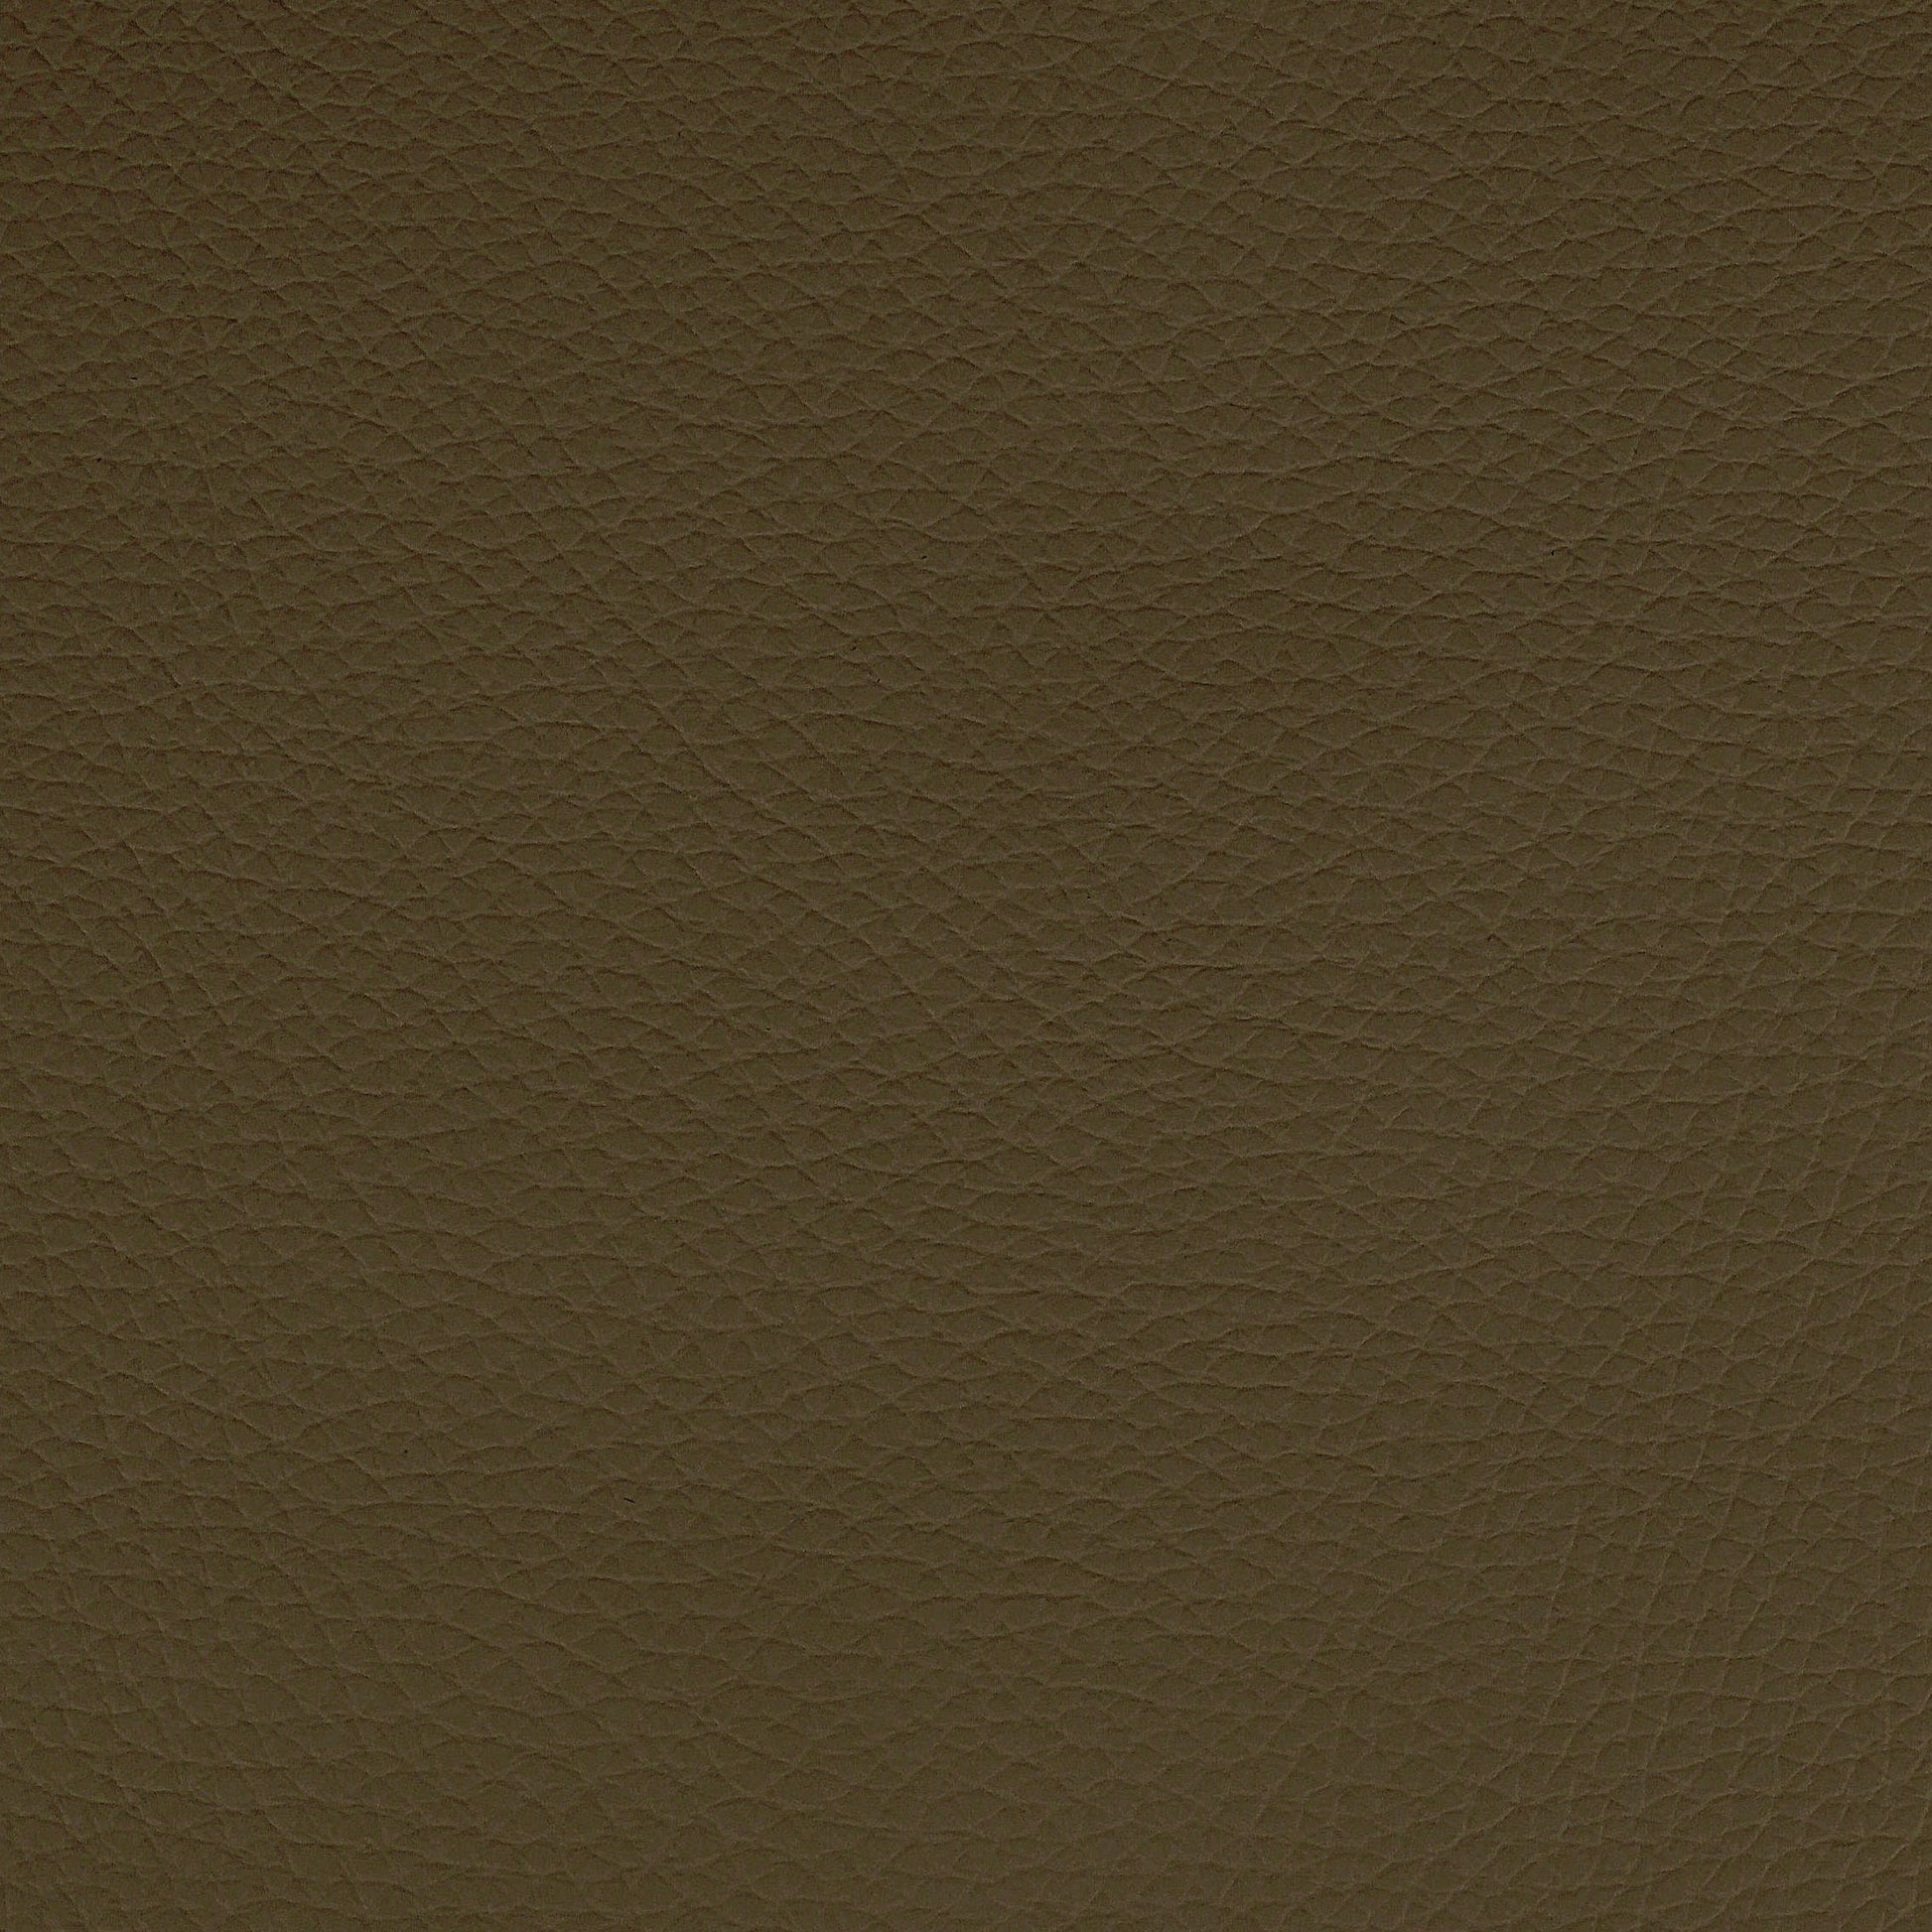 Mystique, Garrison, Iconic® Antimicrobial & Cleanable, Hospitality Leather Hide